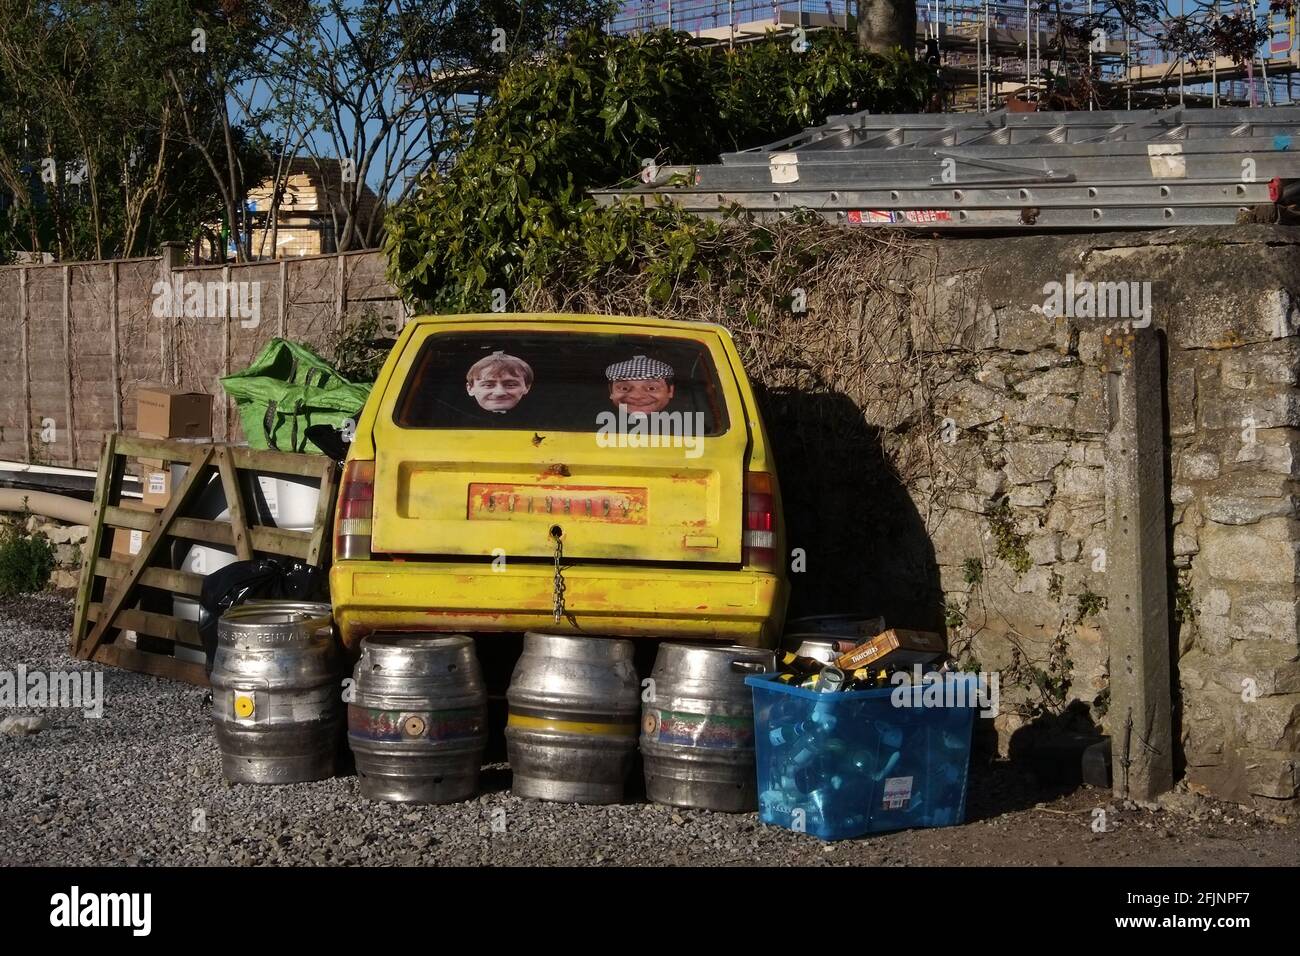 April 2021 - Only fools & horses three wheeler van crashed into a pub wall, used as advertising Stock Photo